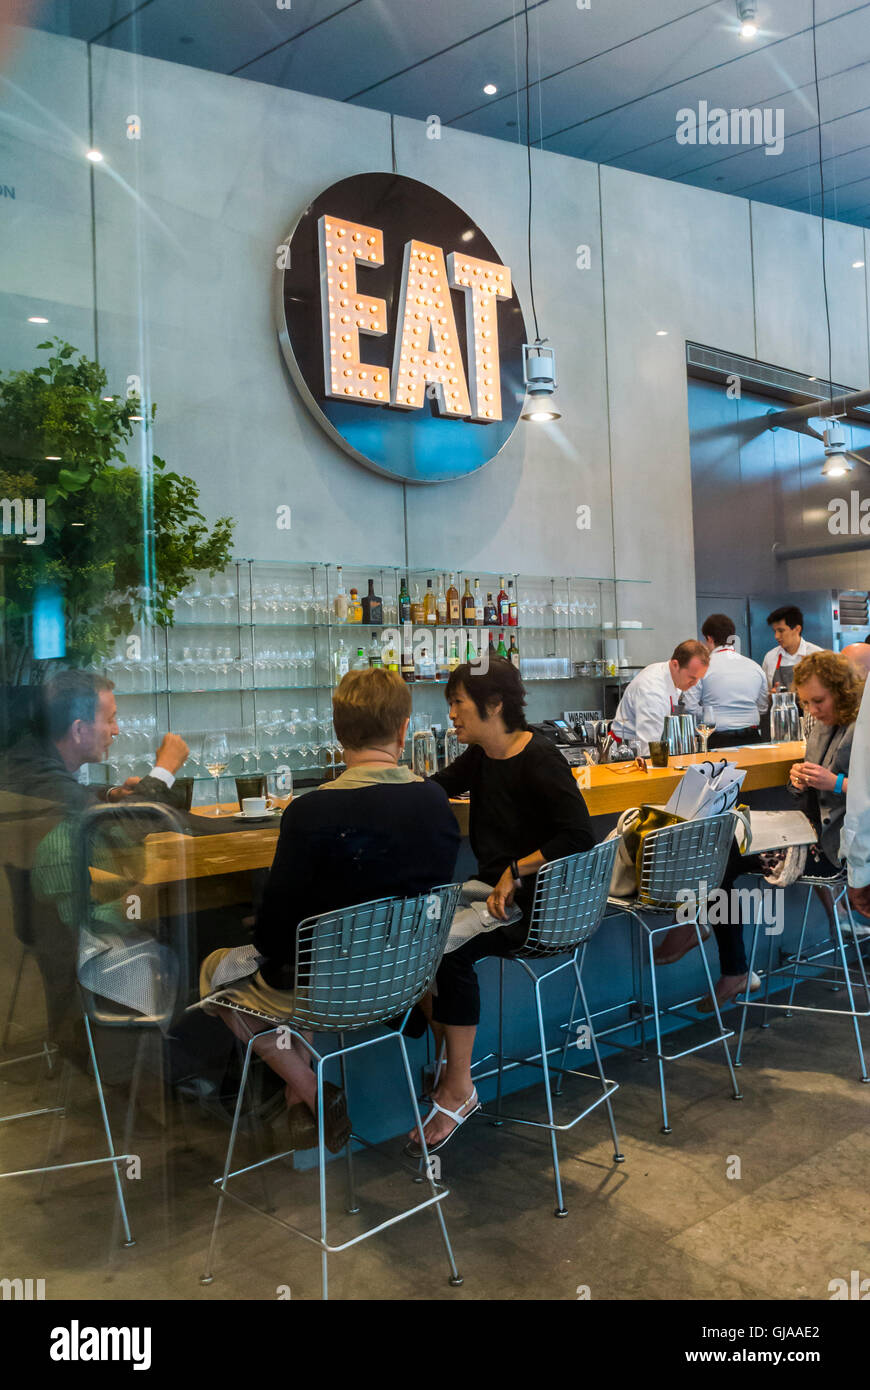 New York City, NY, USA, American People Sharing Drinks in Cafe 'Eat' in Modern American Art Musuem, Downtown Whitney Museum, Meat Packing District Neighborhood Stock Photo